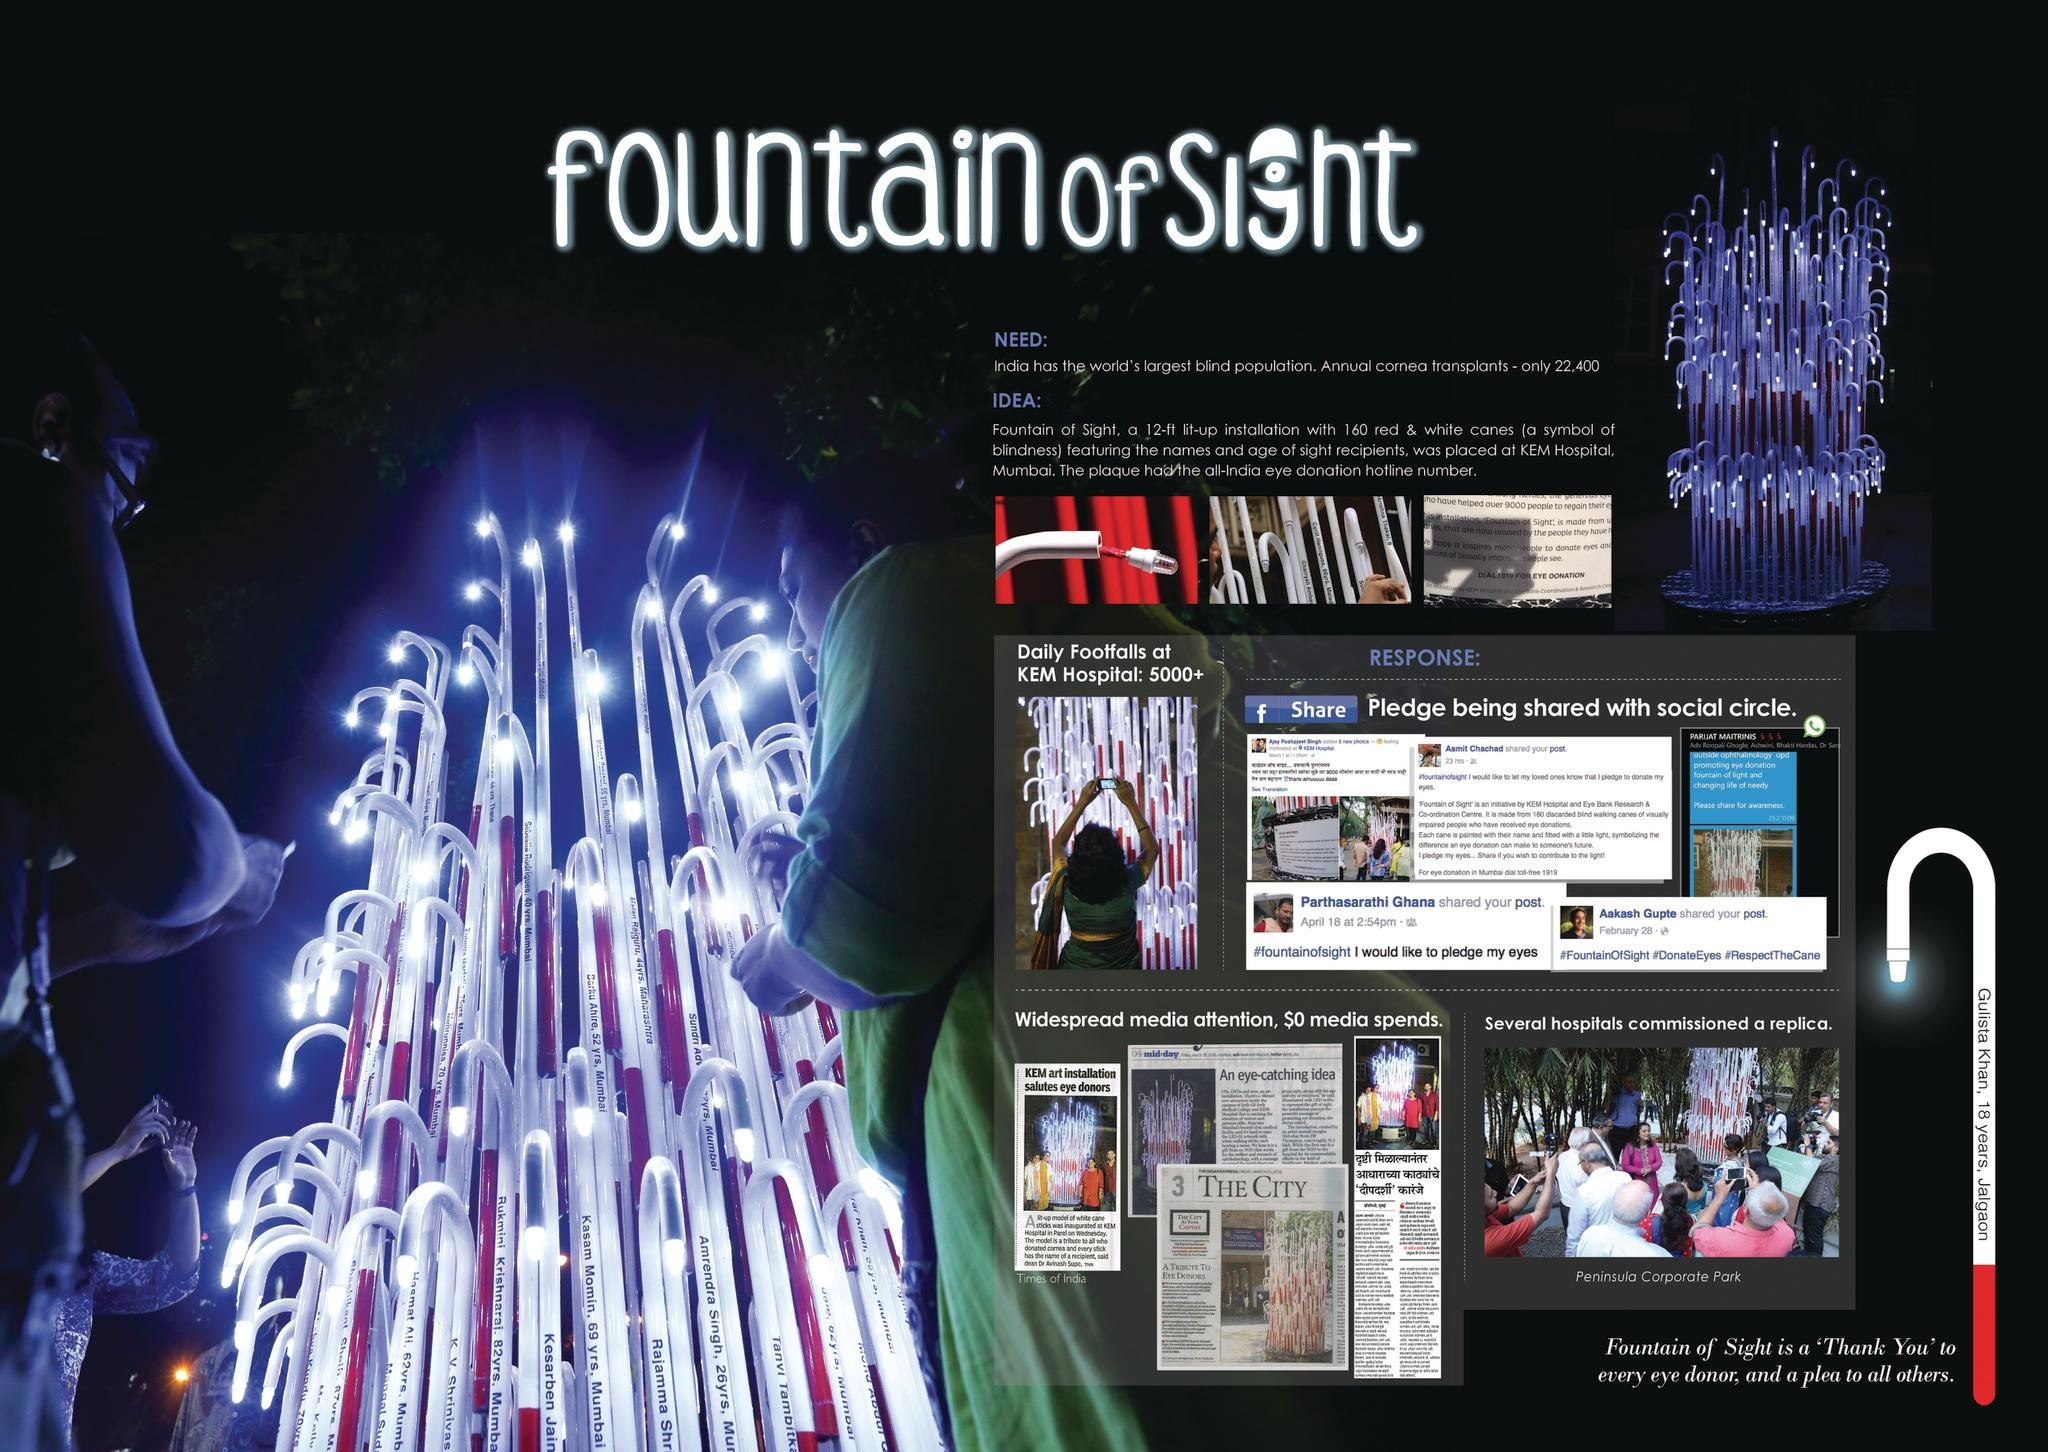 Fountain of Sight